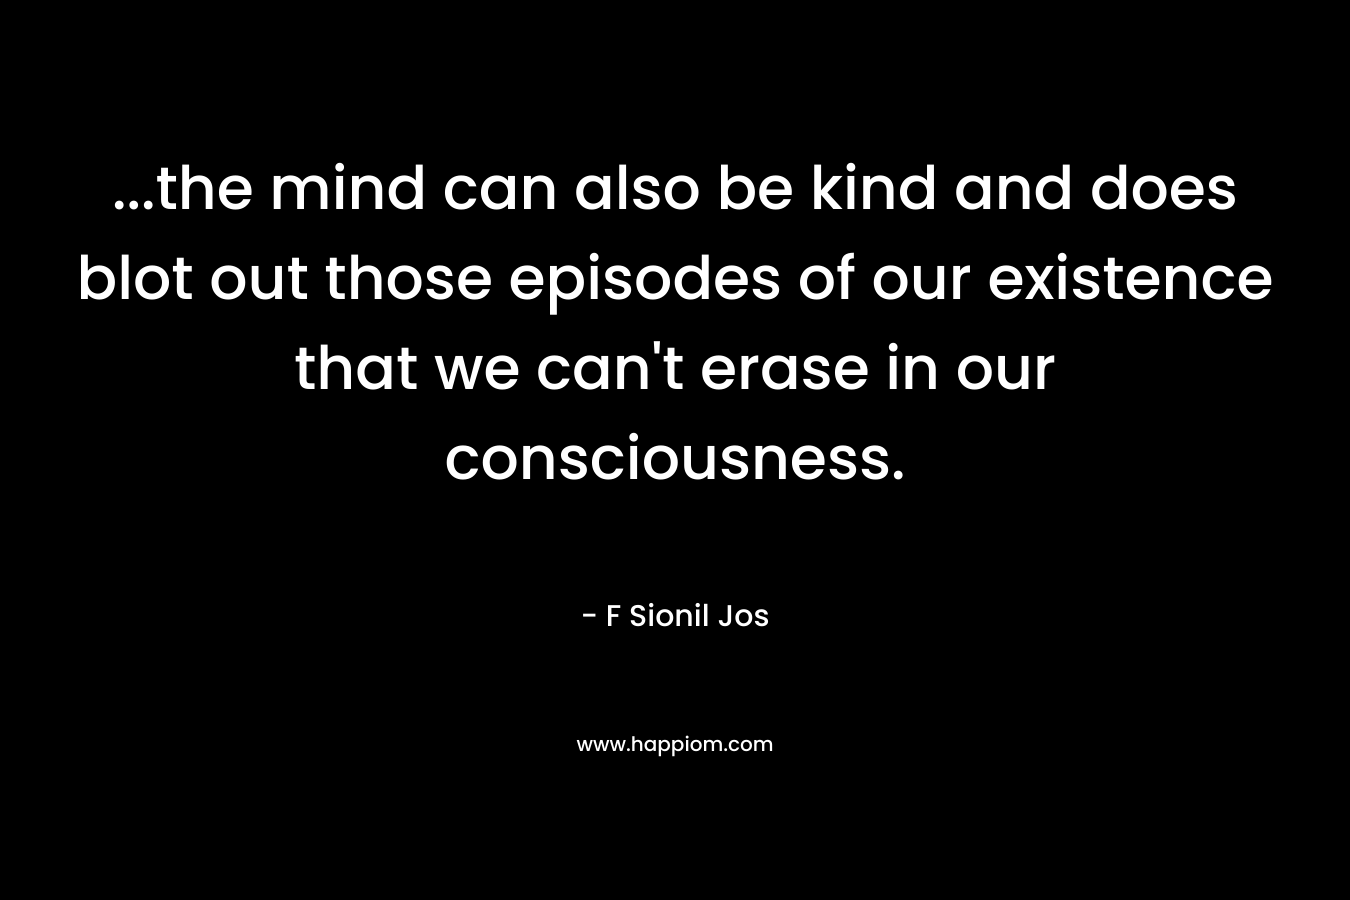 …the mind can also be kind and does blot out those episodes of our existence that we can’t erase in our consciousness. – F Sionil Jos